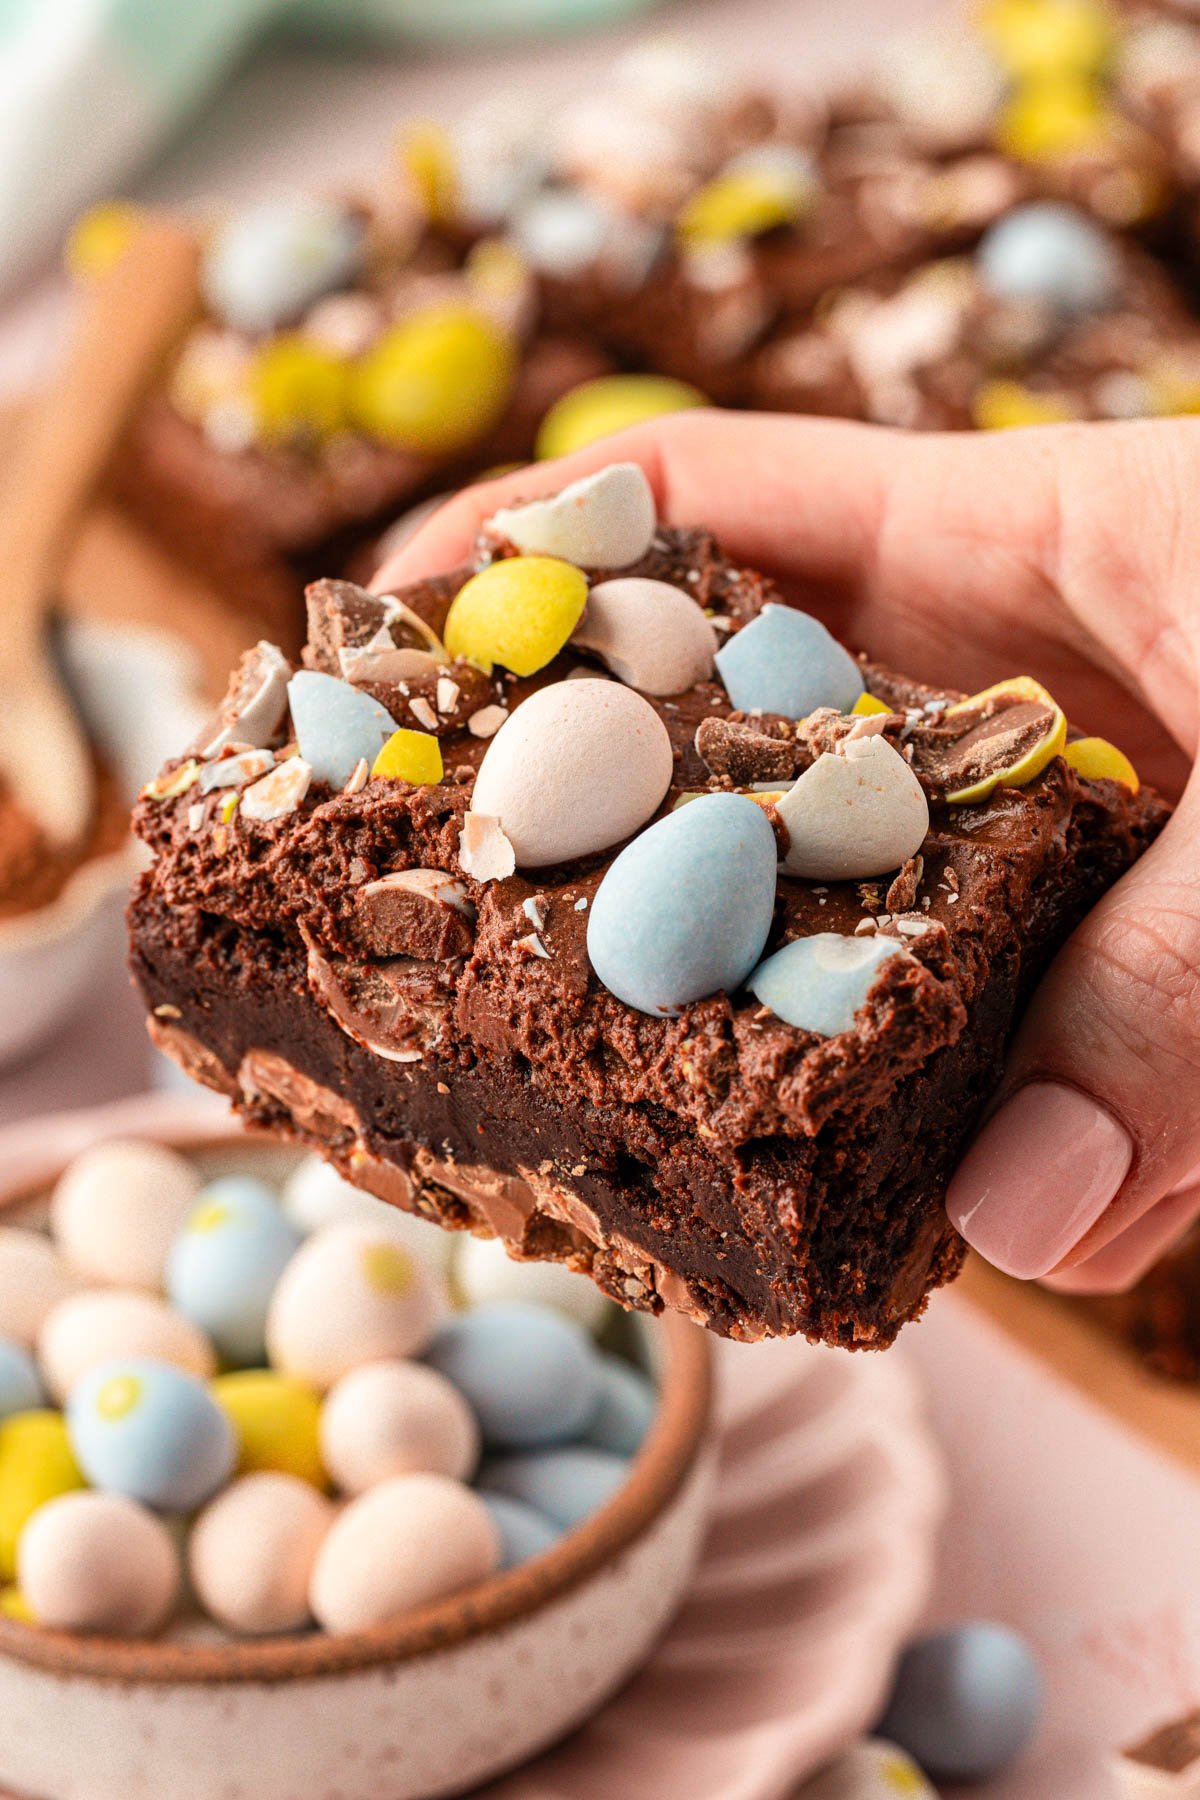 A woman's hand holding a cadbury mini egg brownie to the camera.